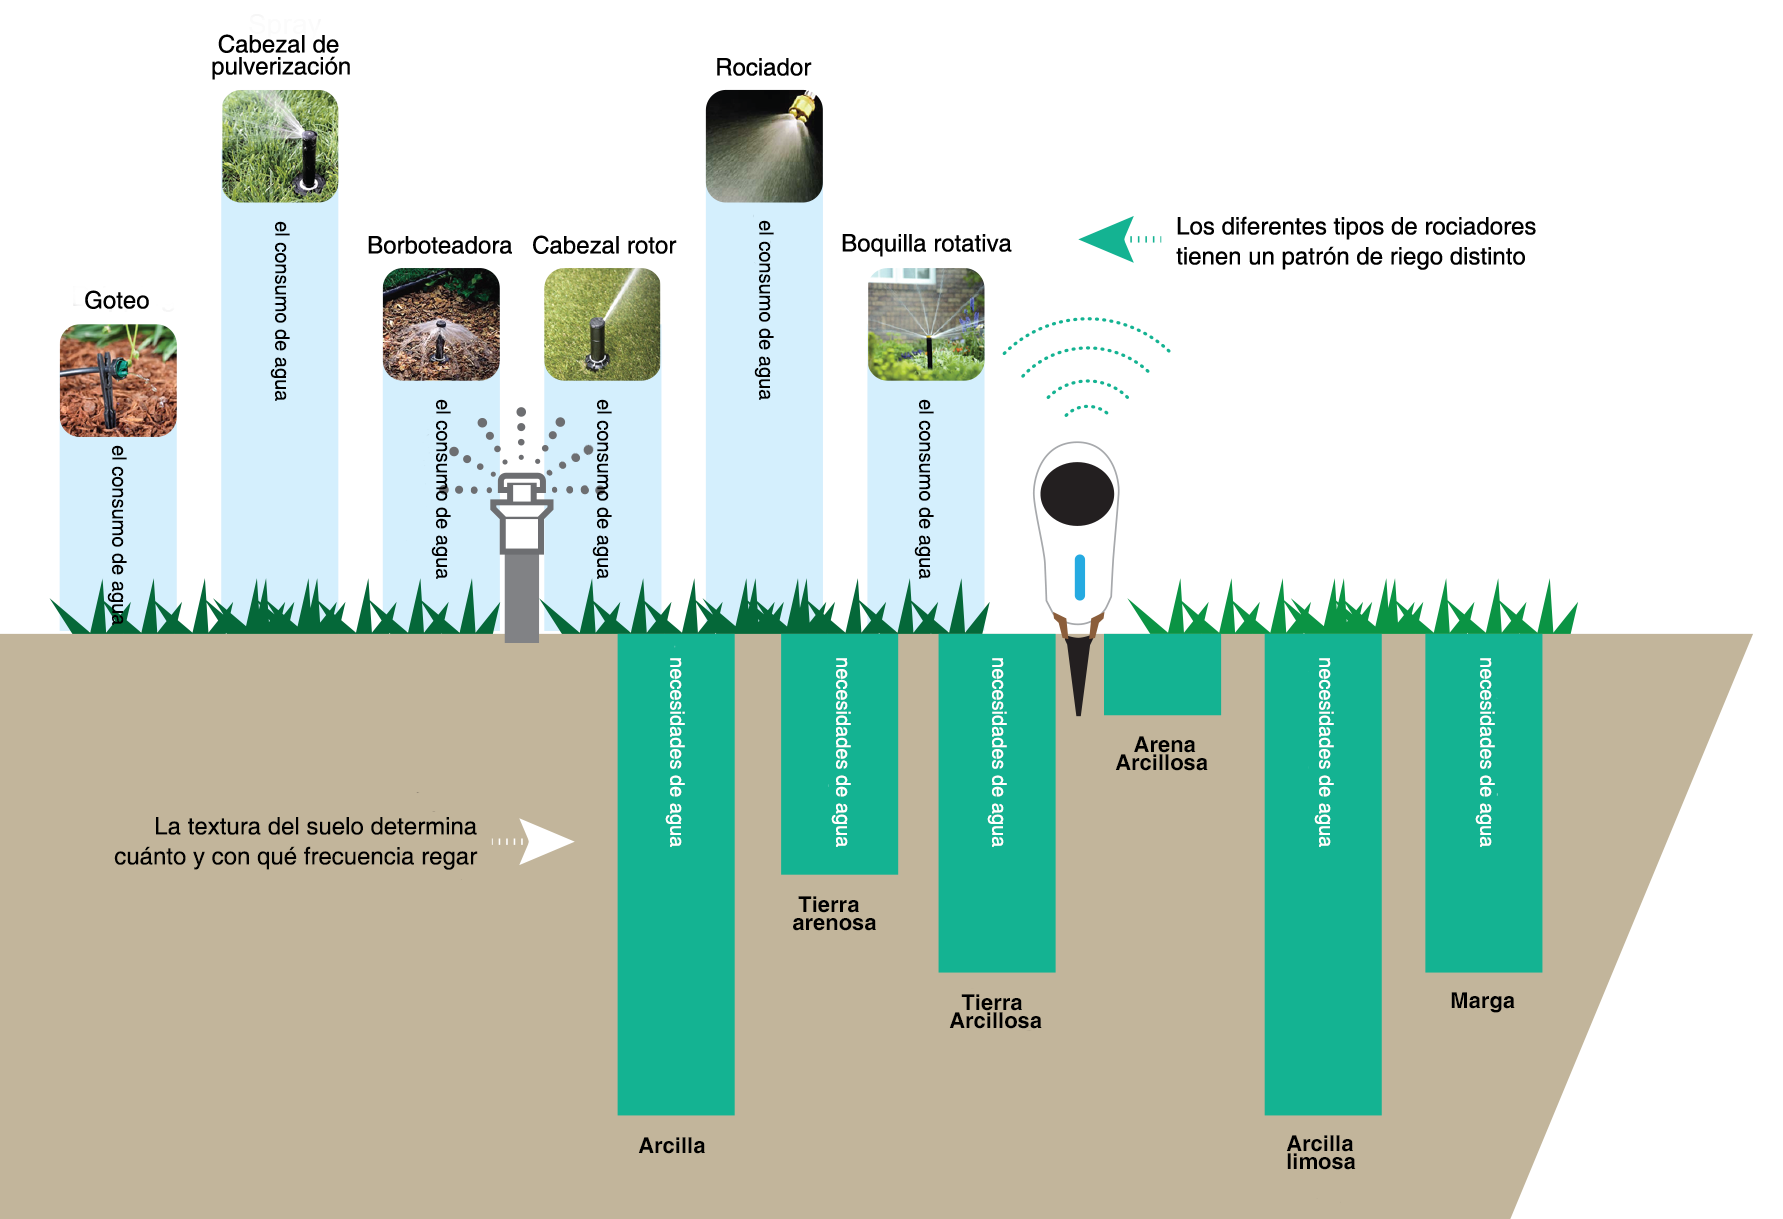 Soil texture determines how much and how often to water. Netro Whisperer measures the humidity, the sunlight and the temperature for various soil types. Different type of sprinkler head has a distinct watering pattern.